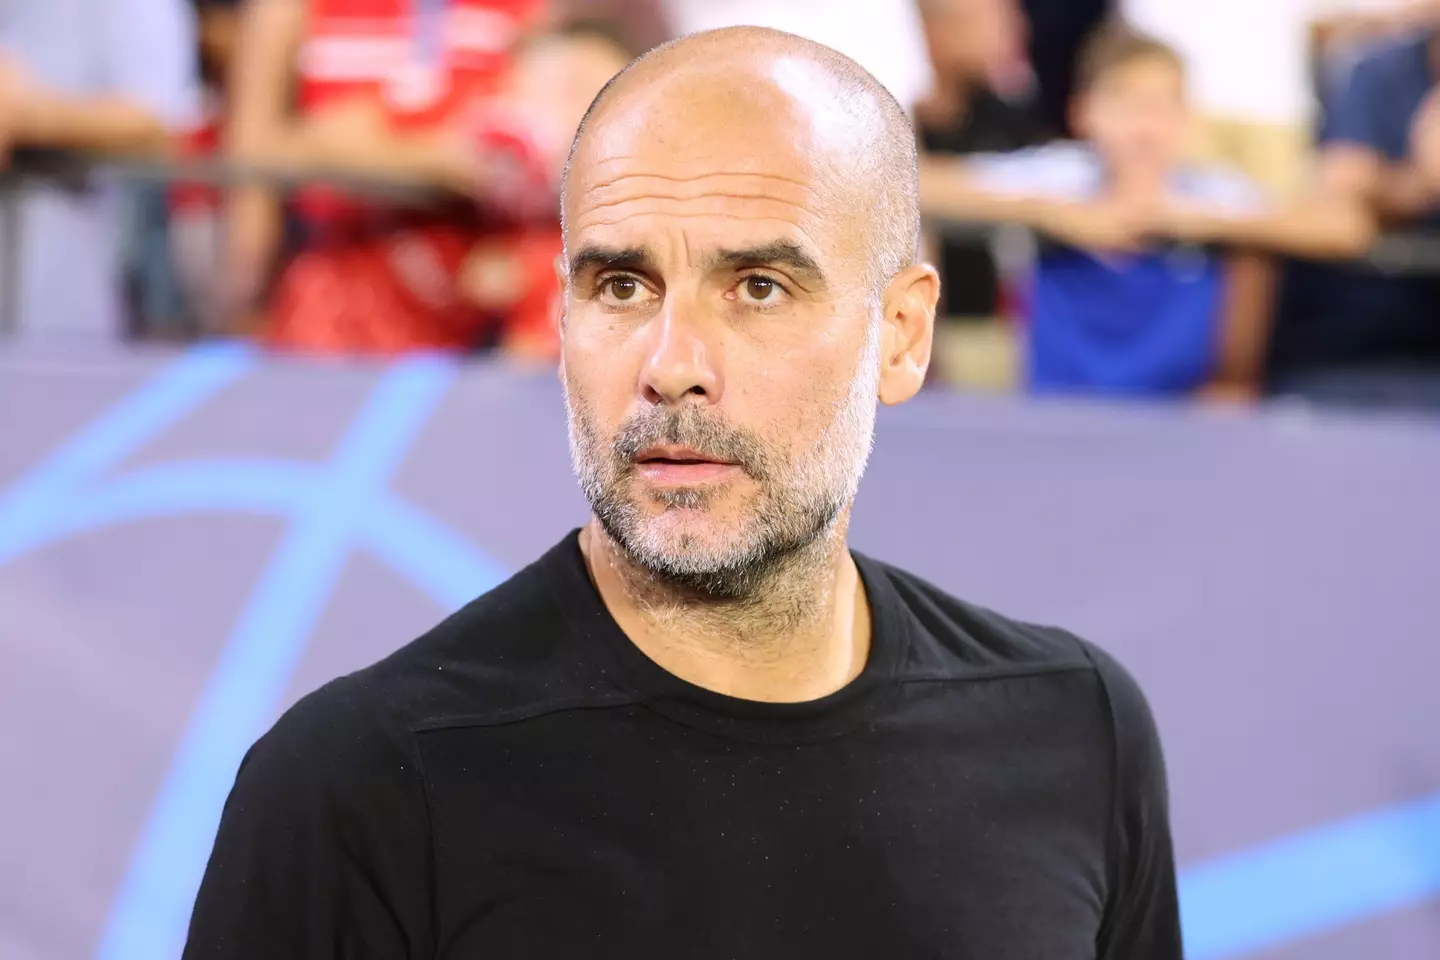 Manchester City manager Pep Guardiola will hope to claim another win over Manchester United boss Erik ten Hag.